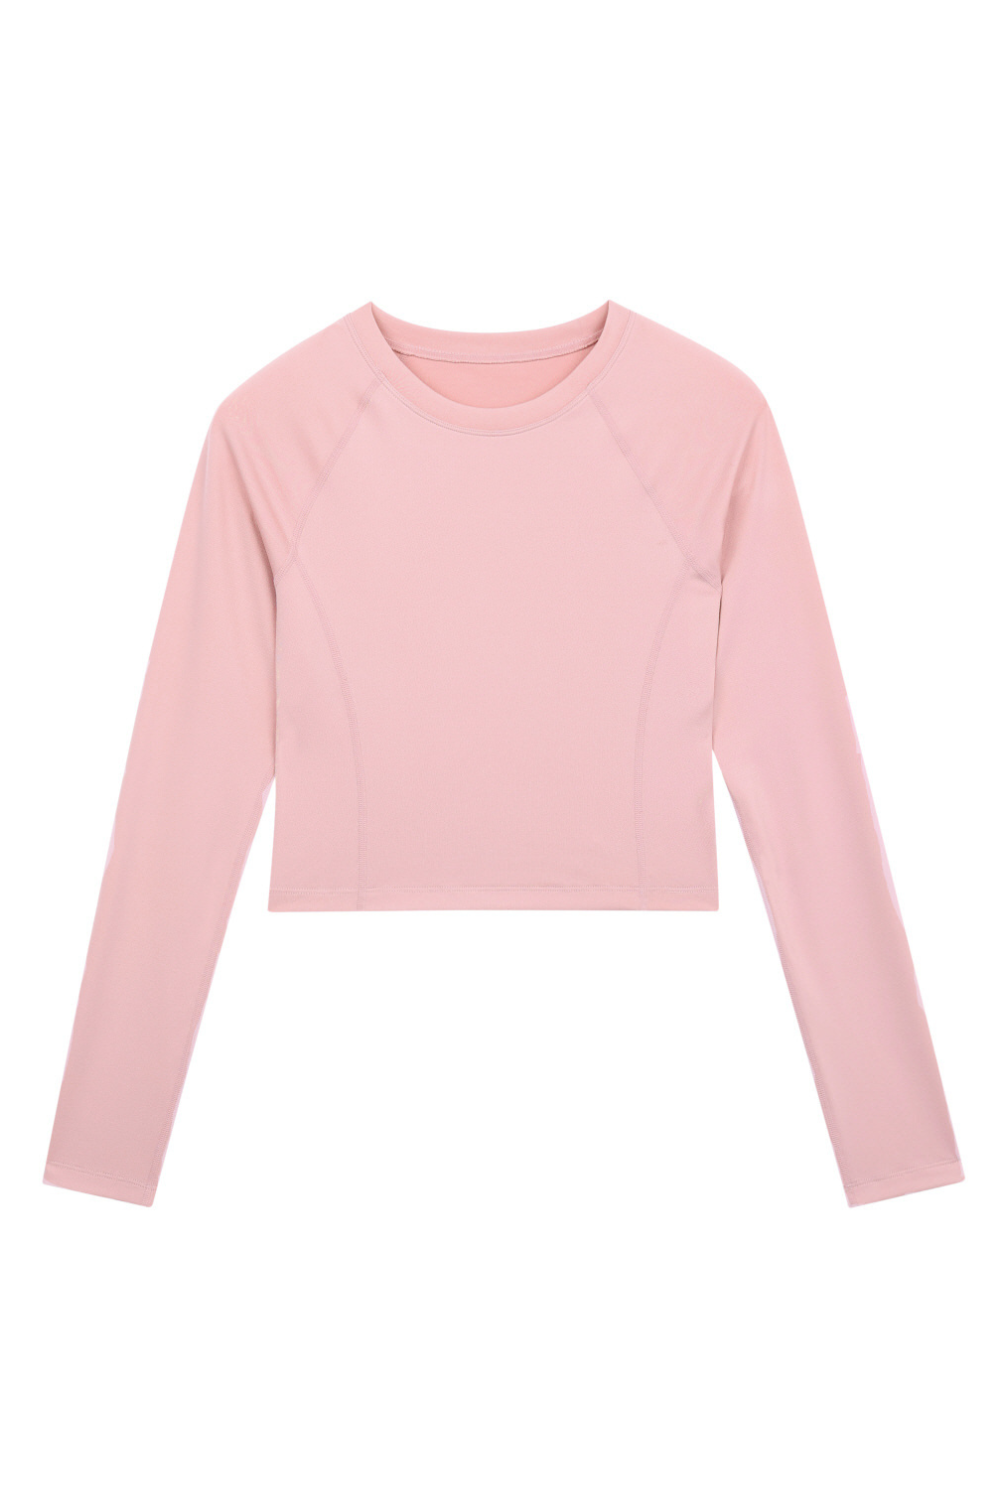 Airtouch Pace Melange Crop Long Sleeve